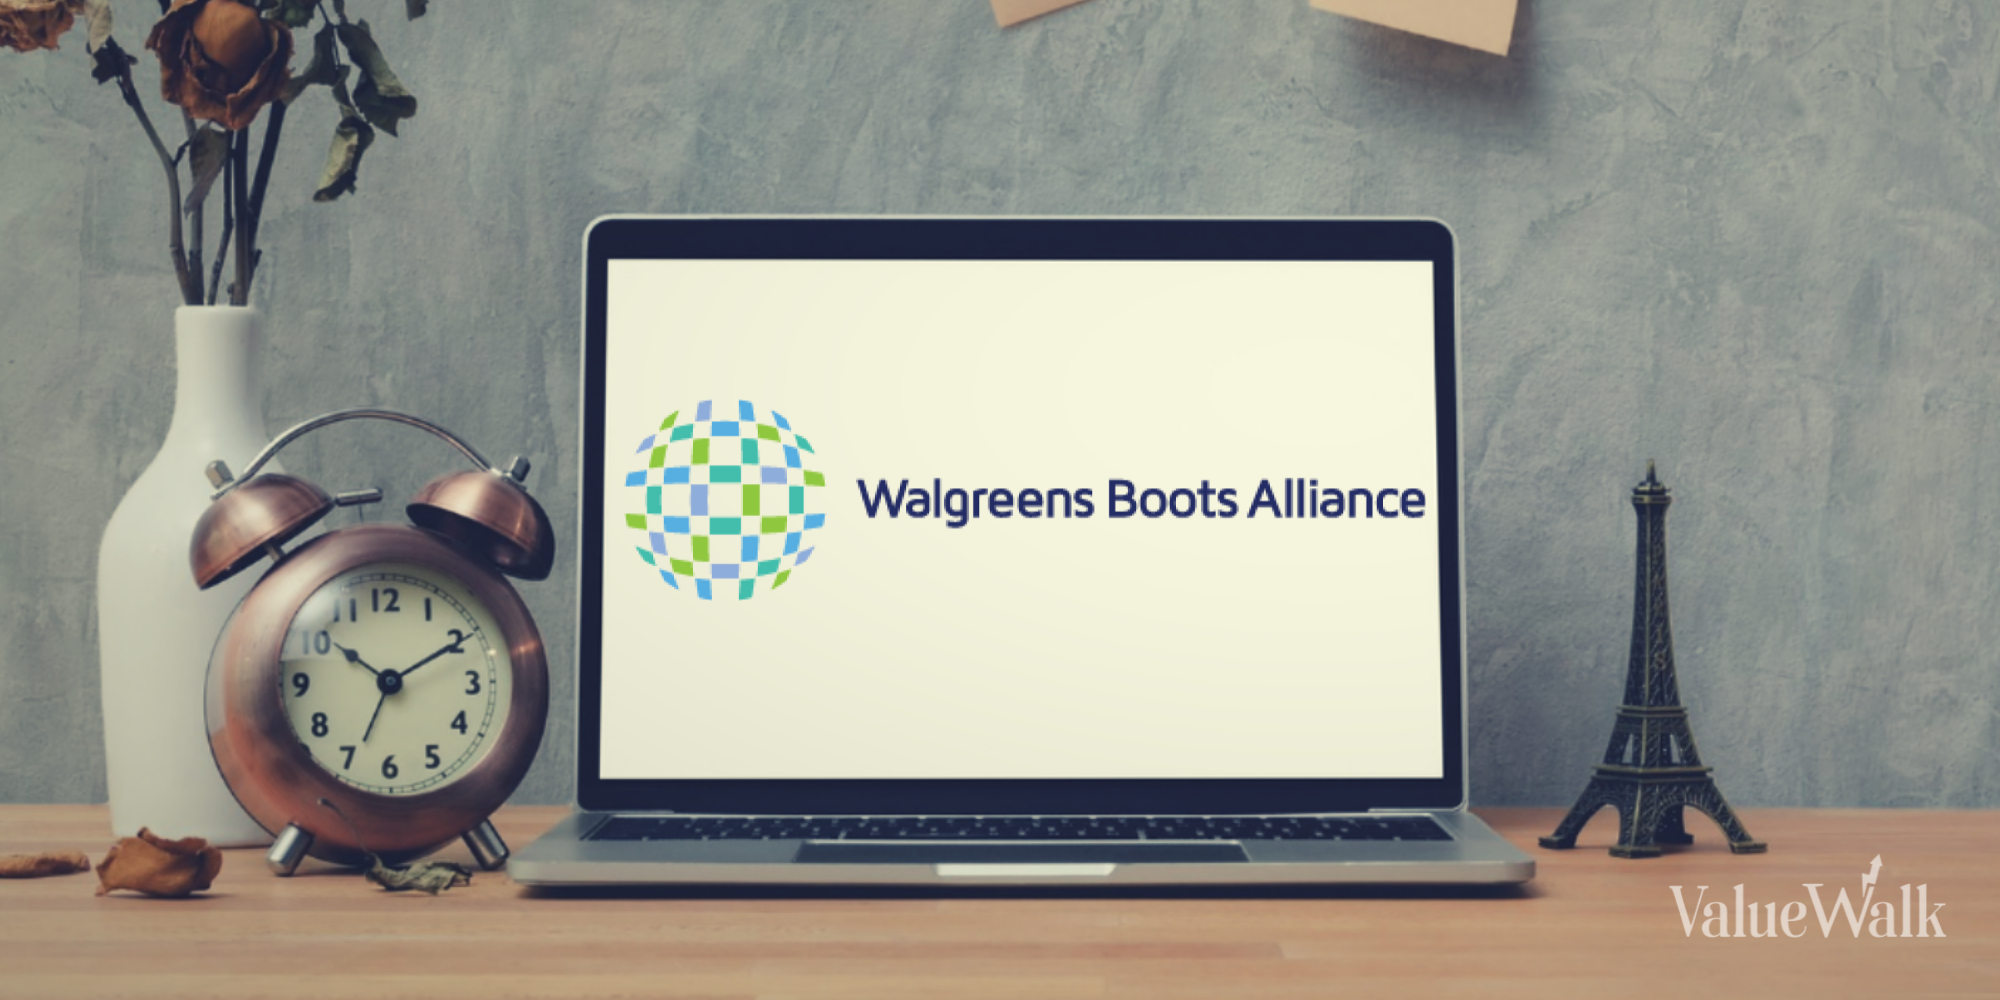 Walgreens Boots Alliance Gains After Making Major Business Changes